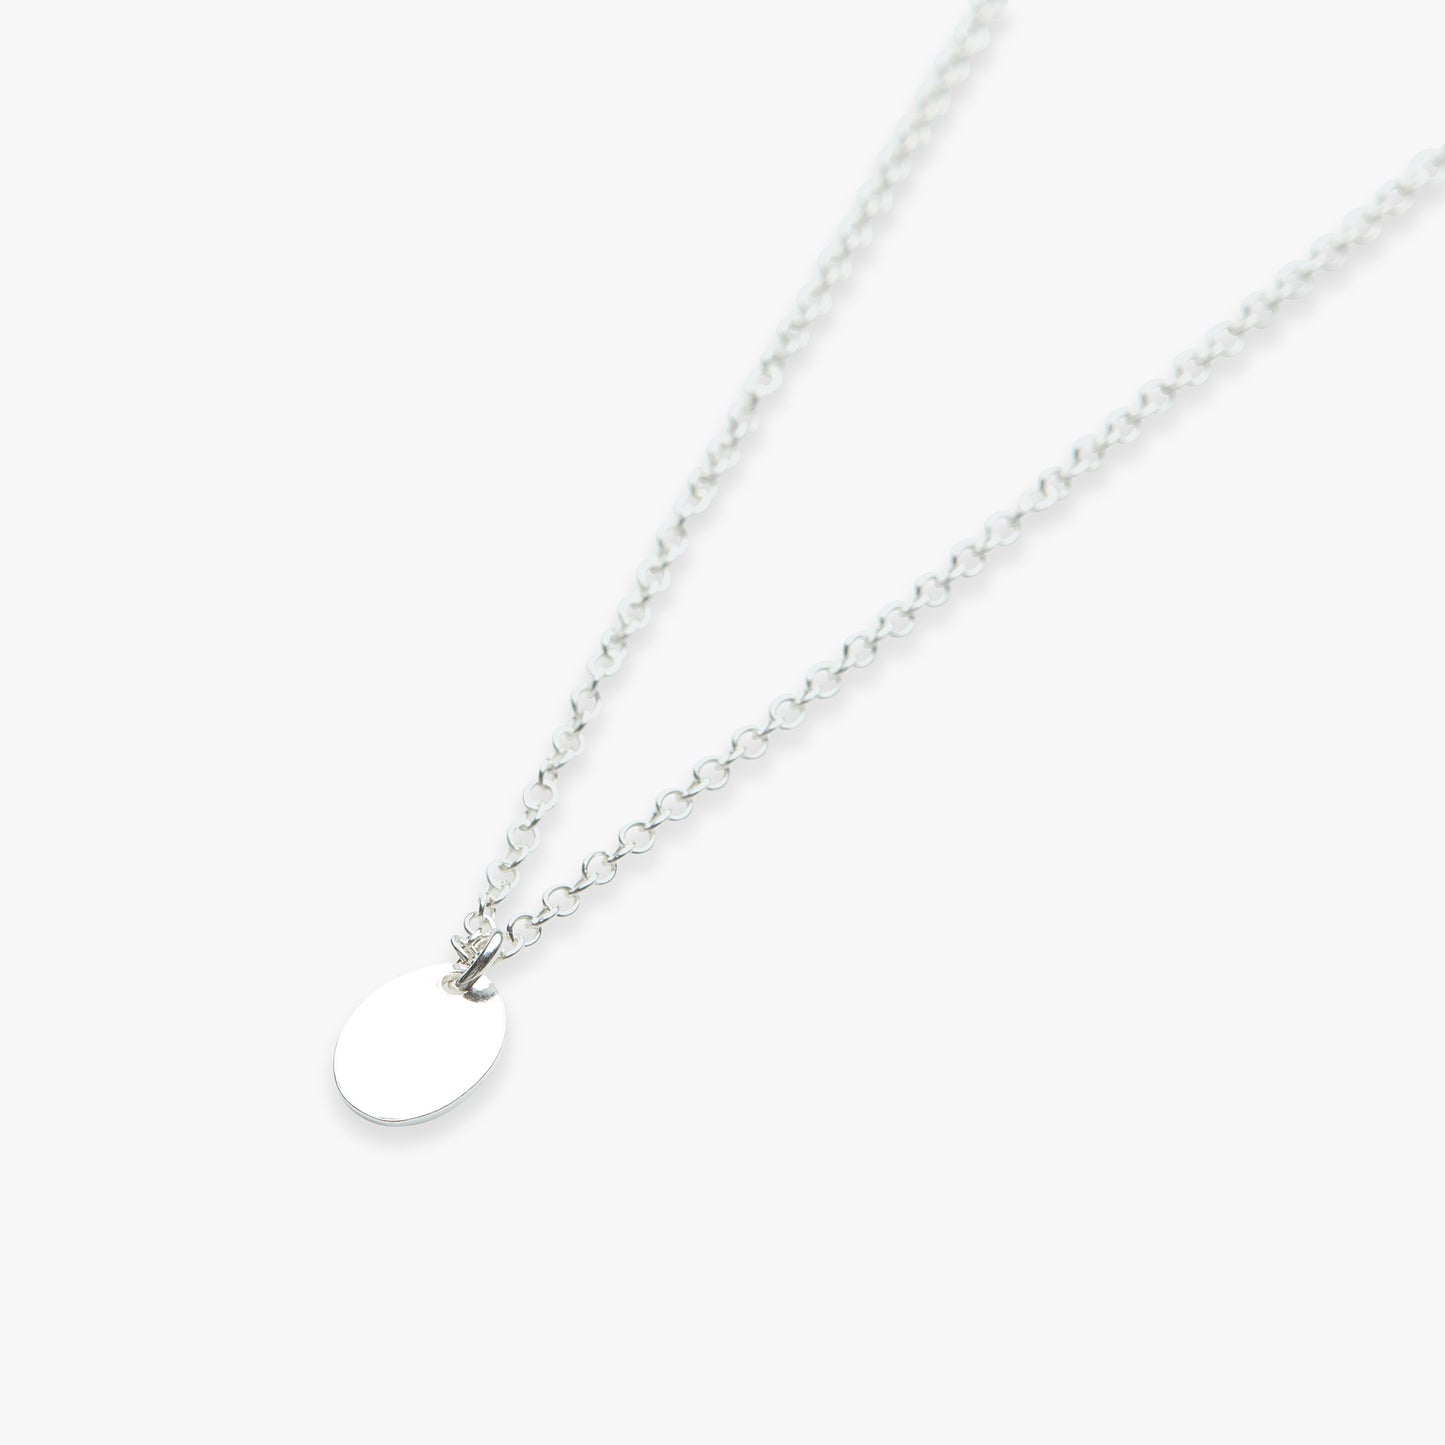 Small oval pendant necklace silver